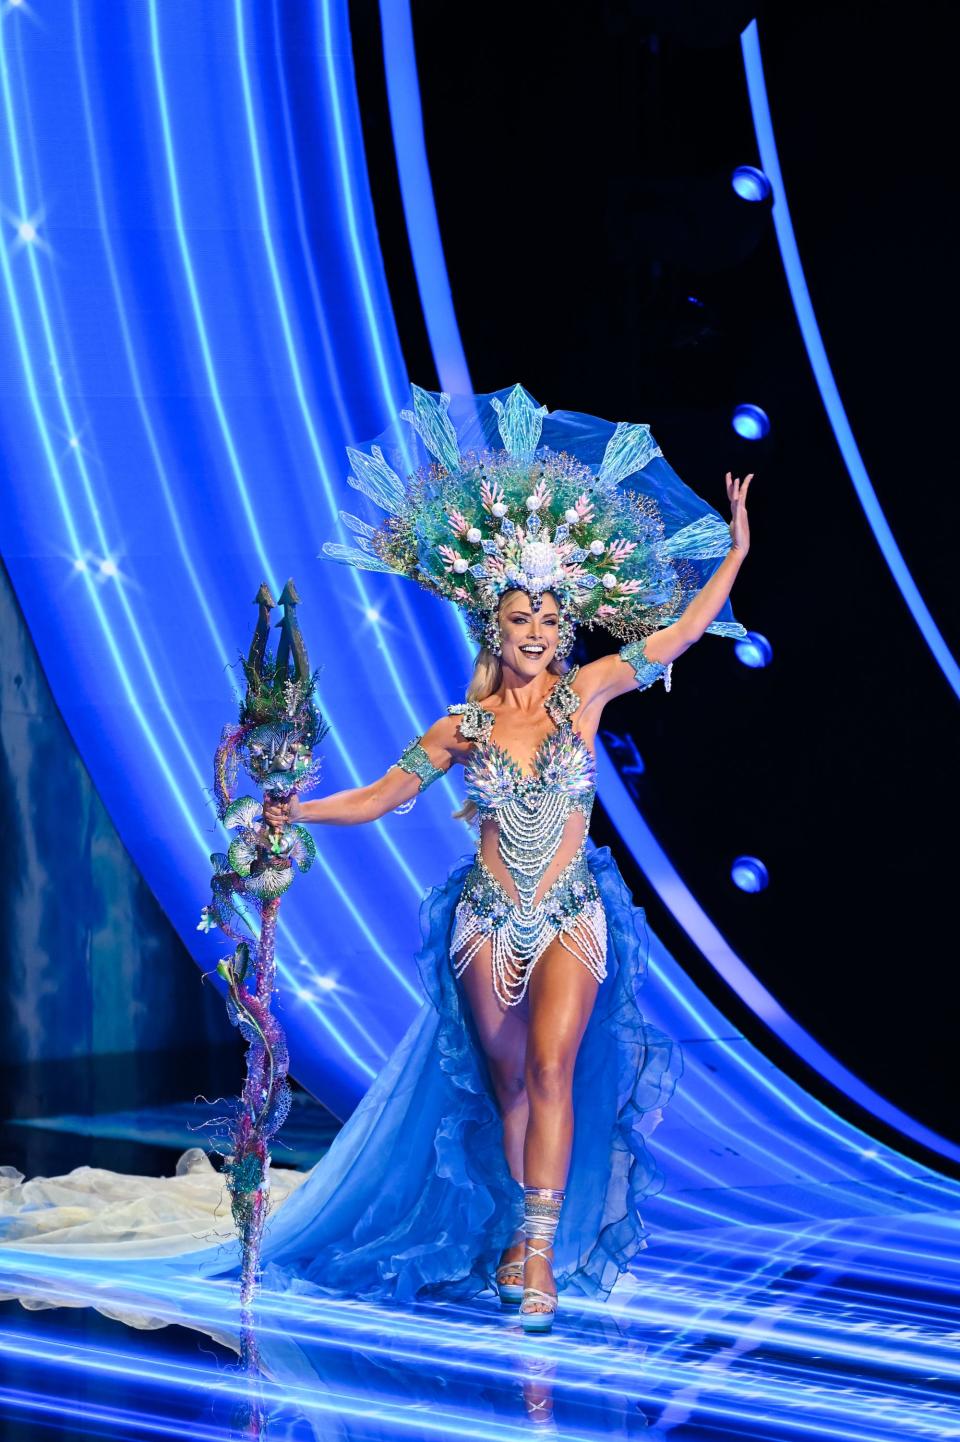 Miss Costa Rica 2023 participates in the Miss Universe National Costume Contest.